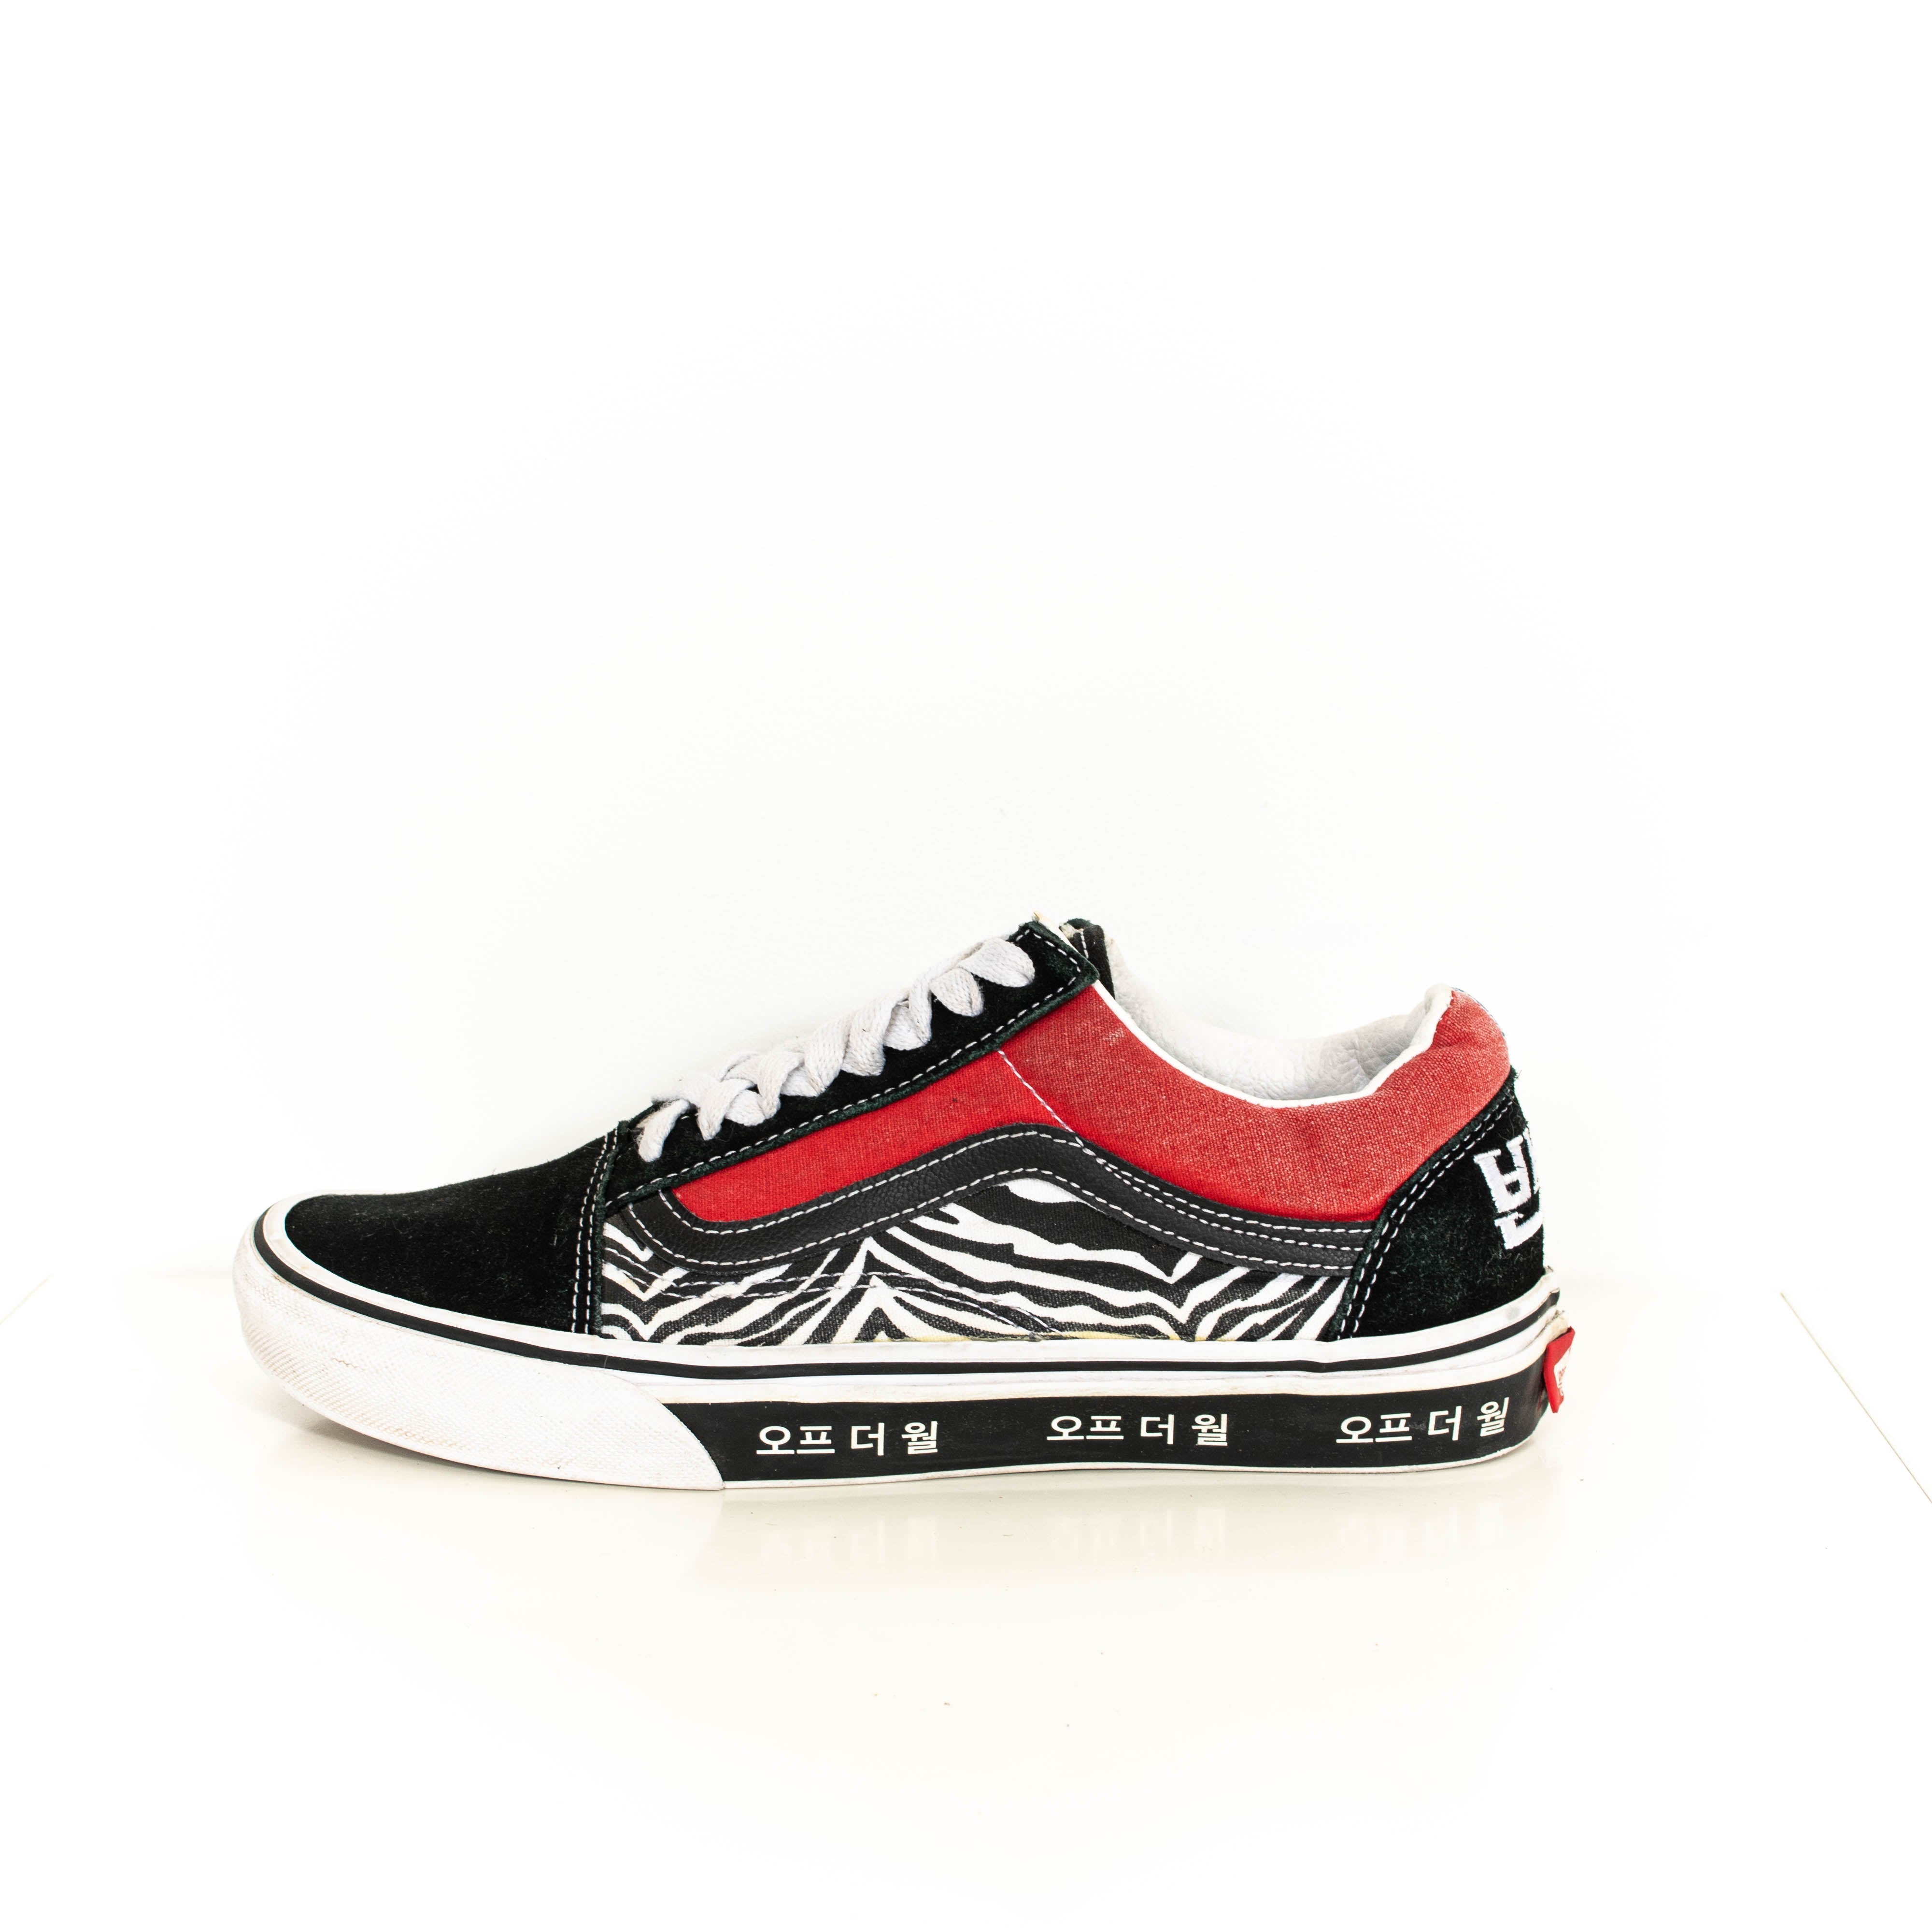 Aggregate more than 229 red vans sneakers womens super hot